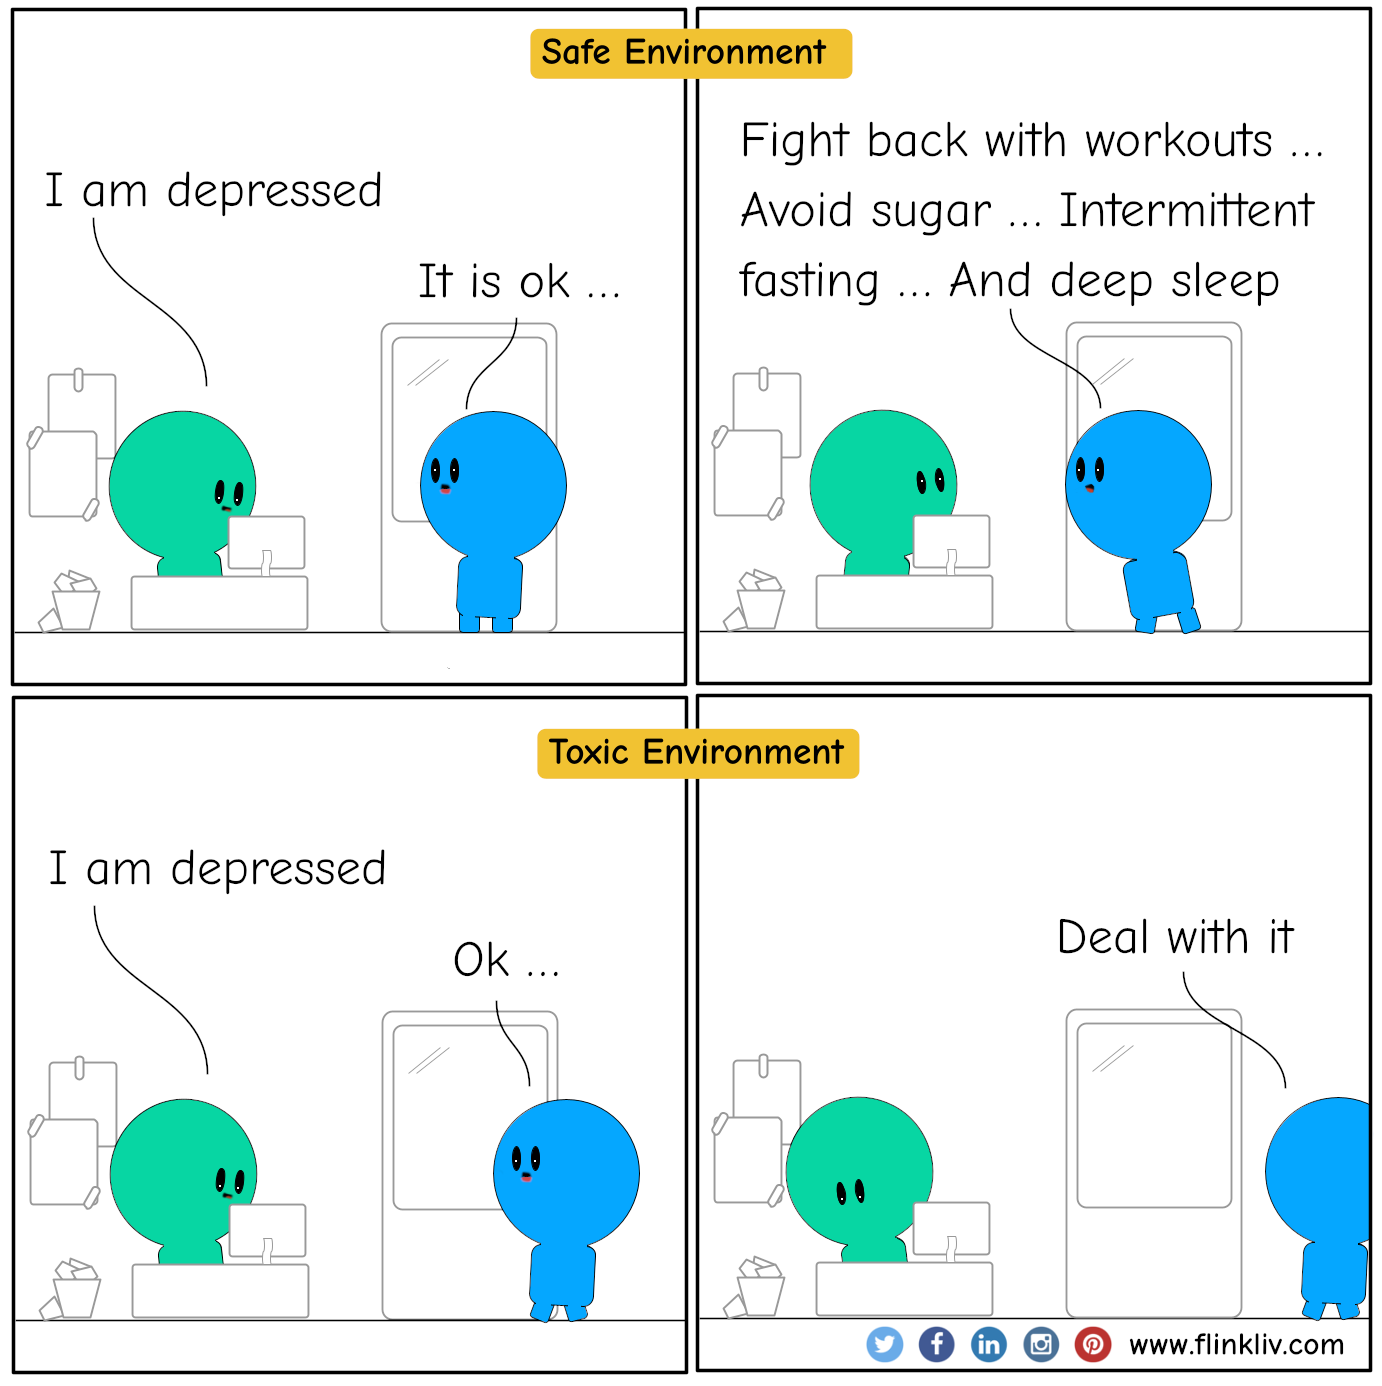 Title: Safe Environment
				A: I am depressed.
				B: It is ok; fight back with workouts, avoid sugar, intermittent fasting, and deep sleep.
				Title: Toxic Environment
				A: I am depressed.
				B: Ok.
				B:Deal with it.
              